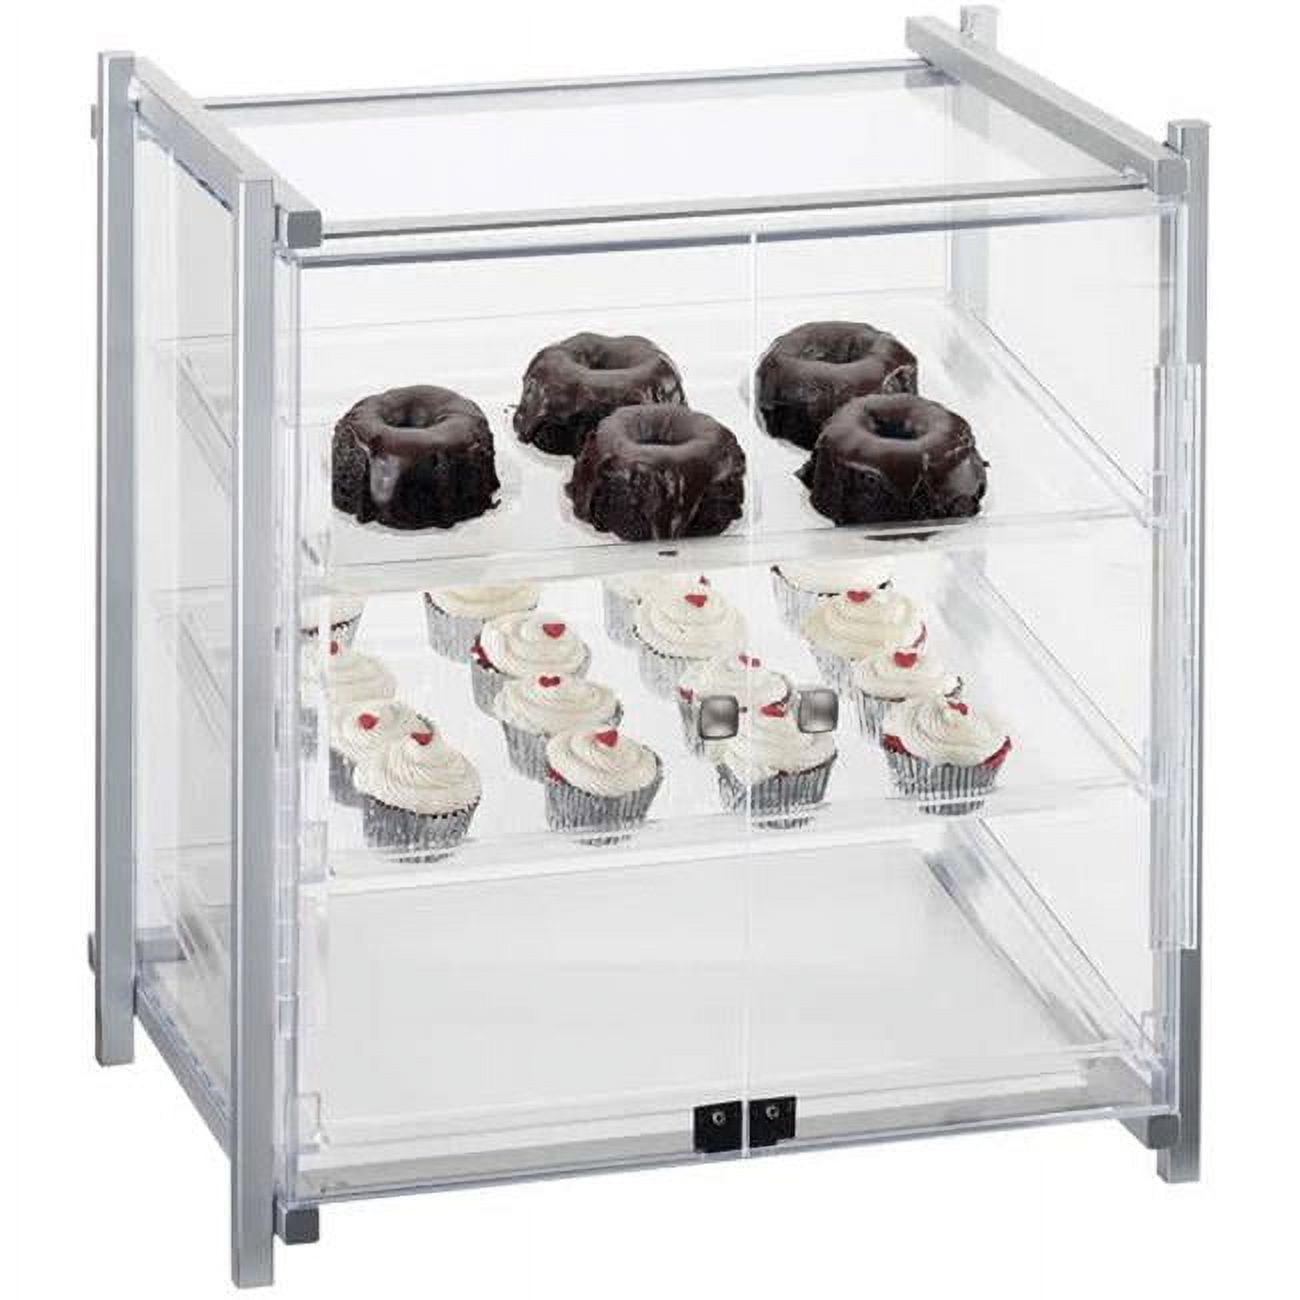 1145-s-74 One By One 3 Tier Silver Display Case With Front Doors - 20.5 X 17 X 21.875 In.